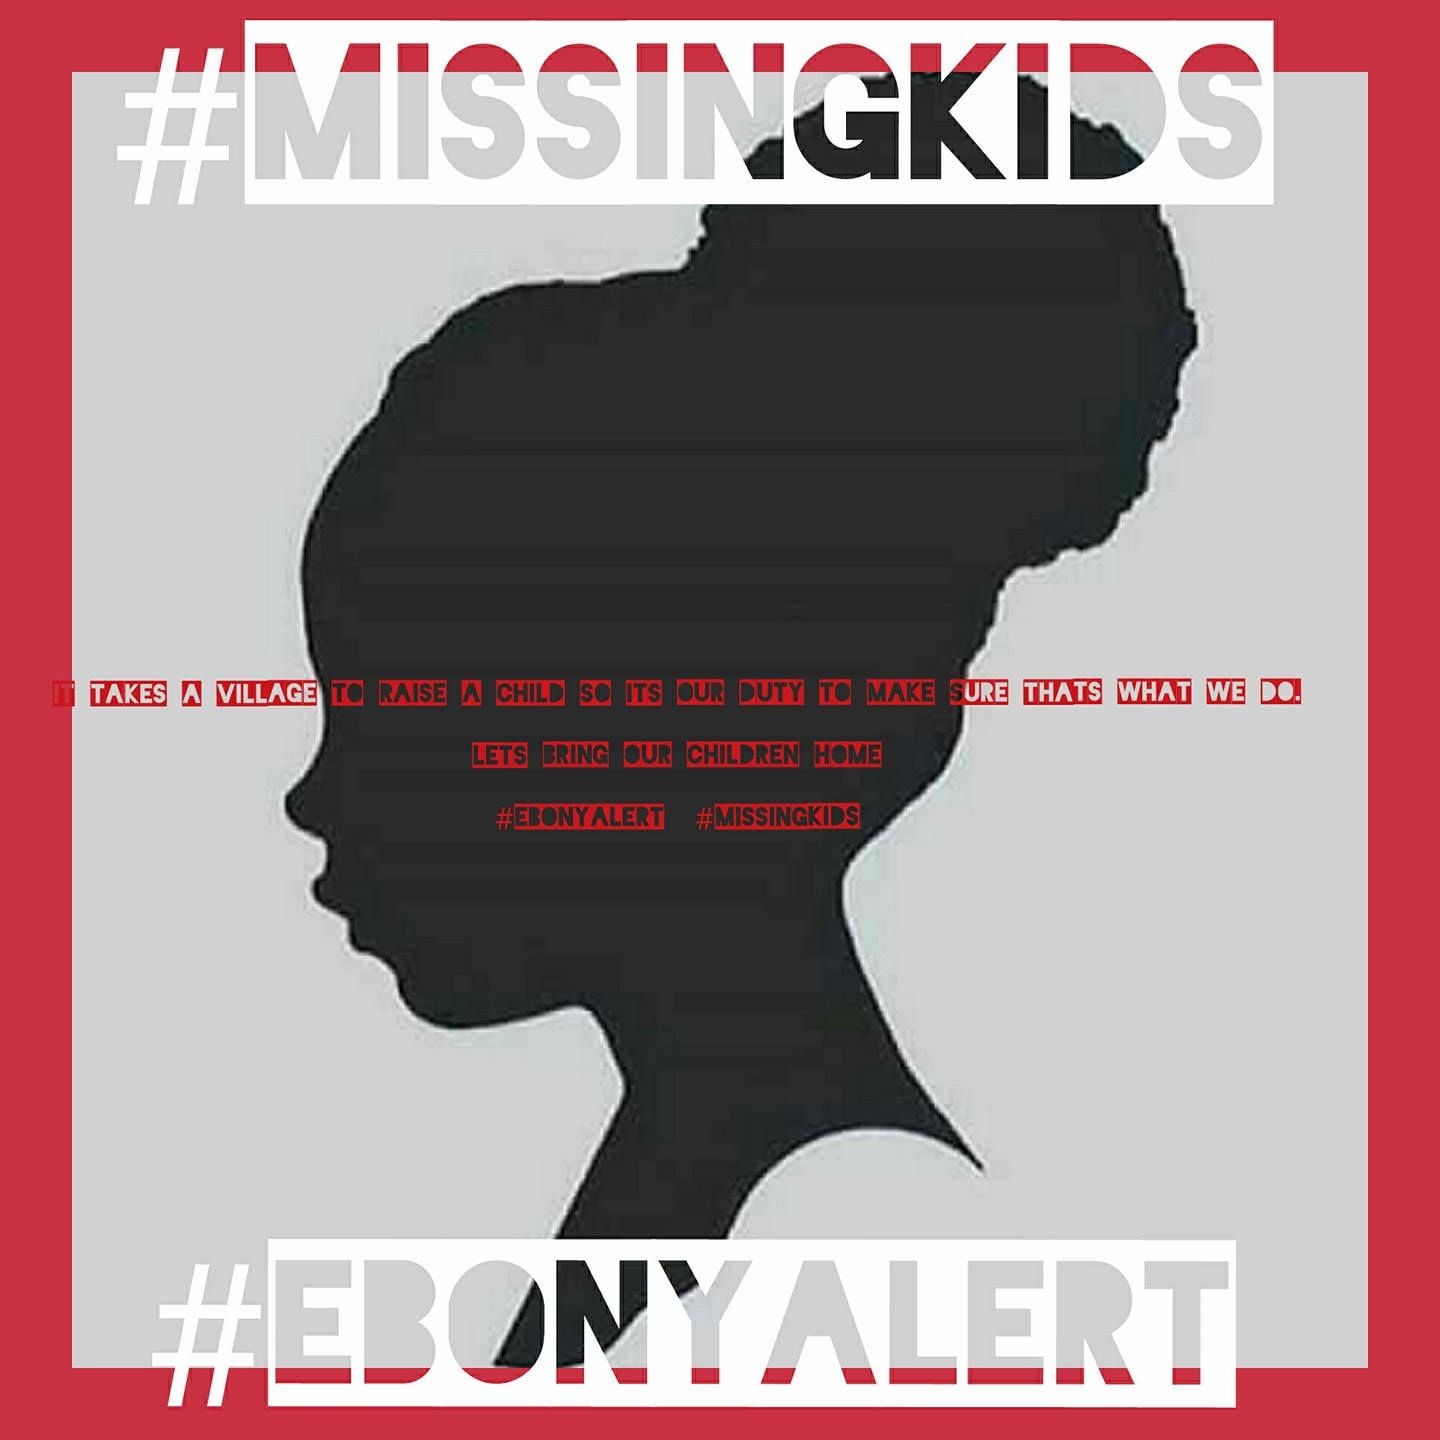 The image features a black silhouette of a child's profile with hashtags about missing kids and a call to action.